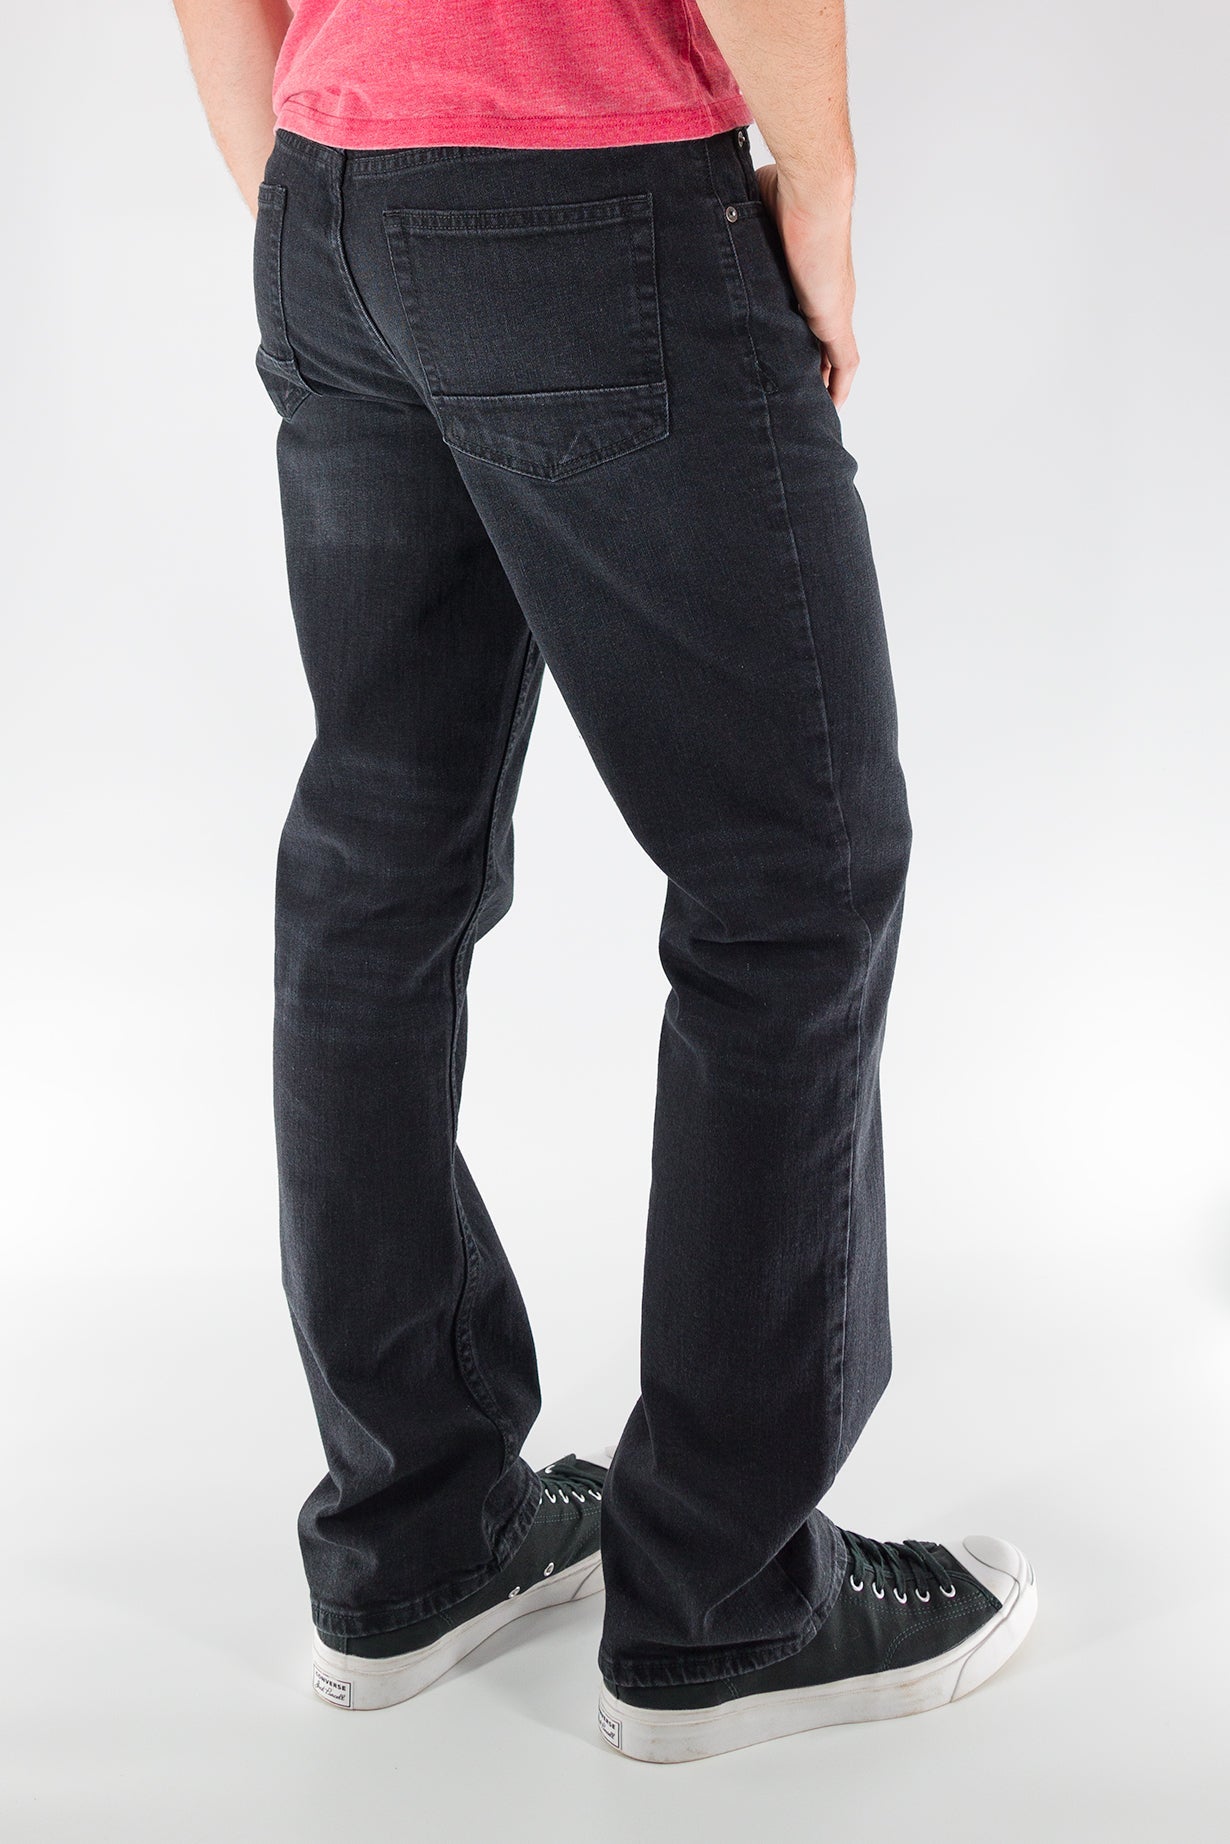 DEVIL-DOG® Relaxed Straight Jean - Black Mountain